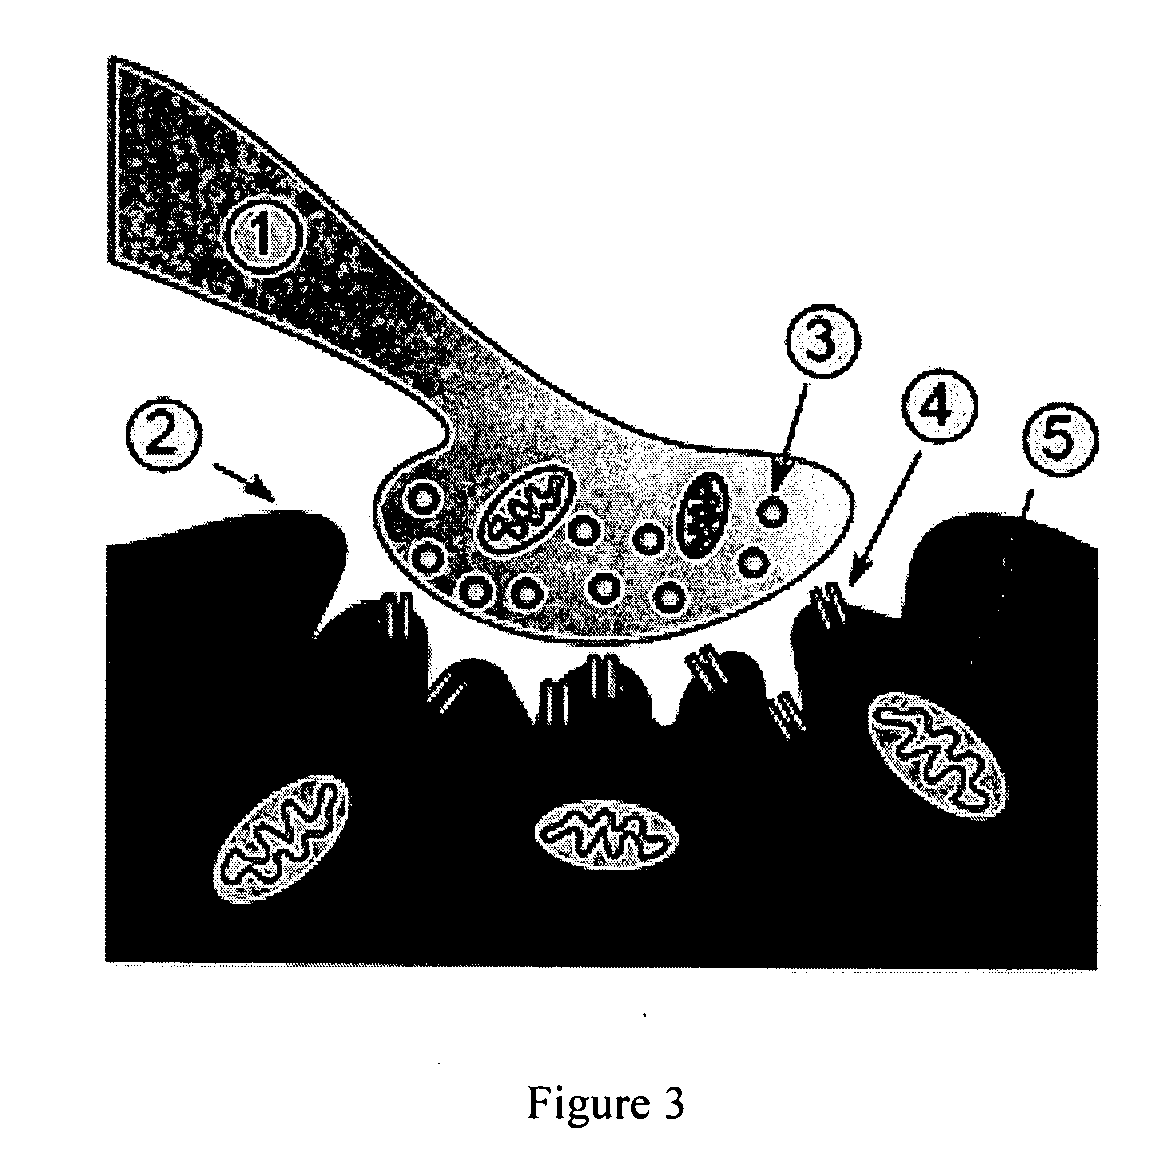 Method and system for effecting changes in pigmented tissue